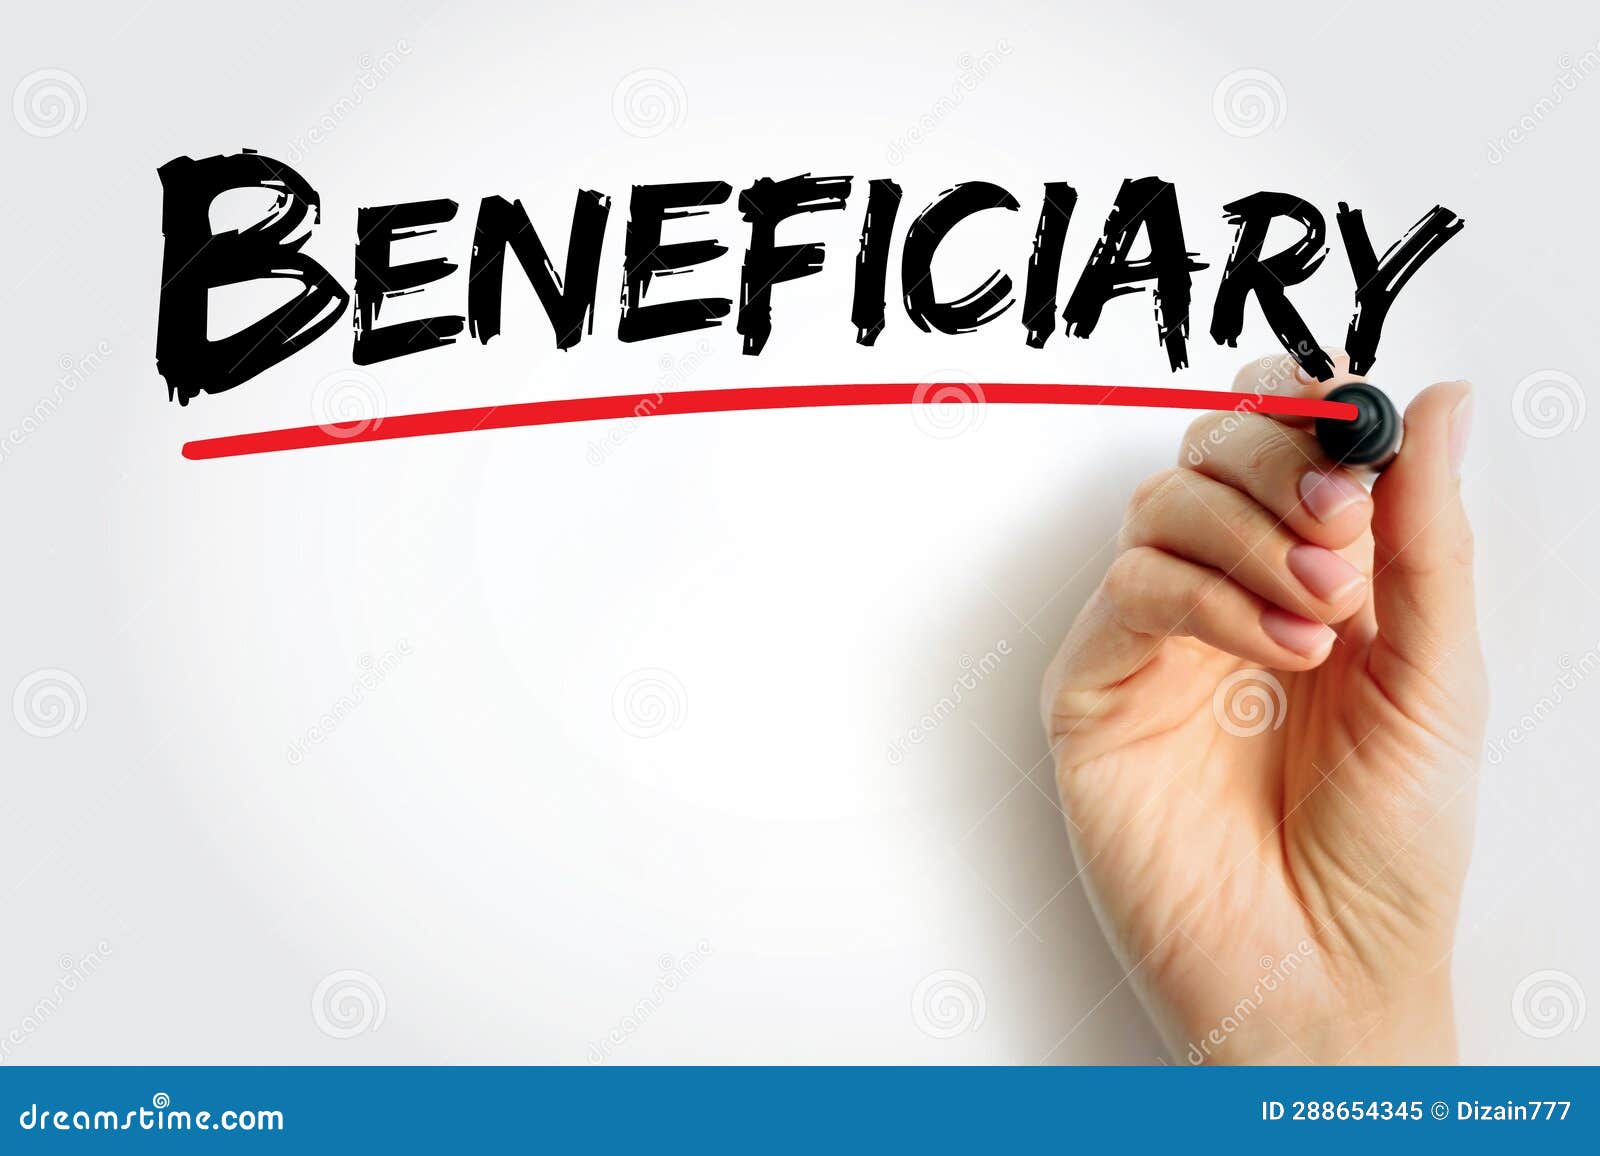 beneficiary - person or other legal entity who receives money or other benefits from a benefactor, text concept background